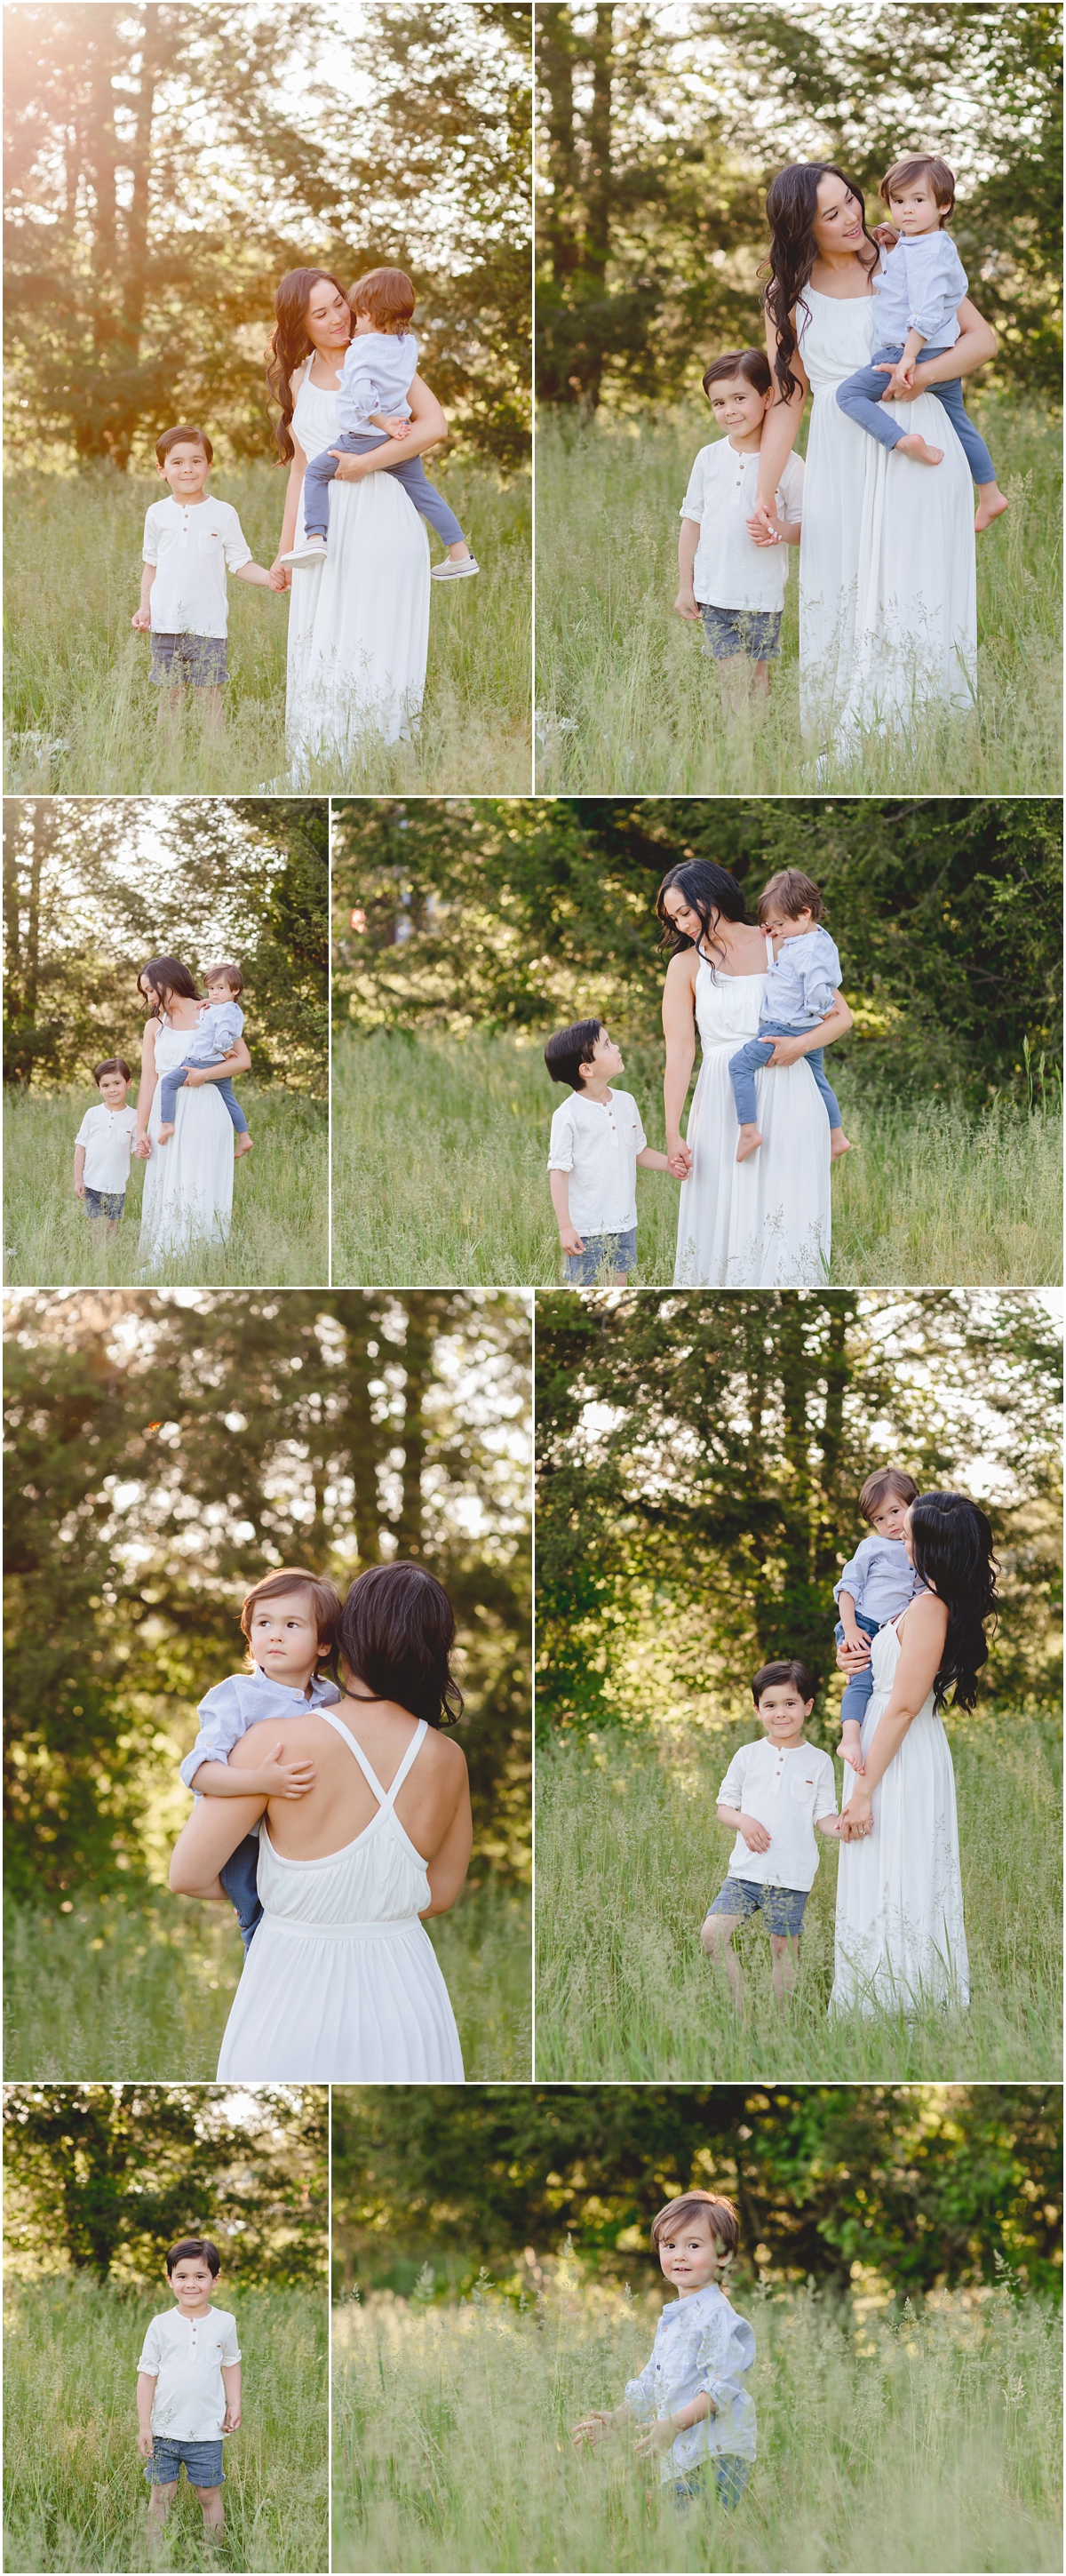 Best Family Photographers in CT | Natural CT Family Photography | CT Family Photographer | West Hartford Family Photography | CT Photography | www.kellidease.com